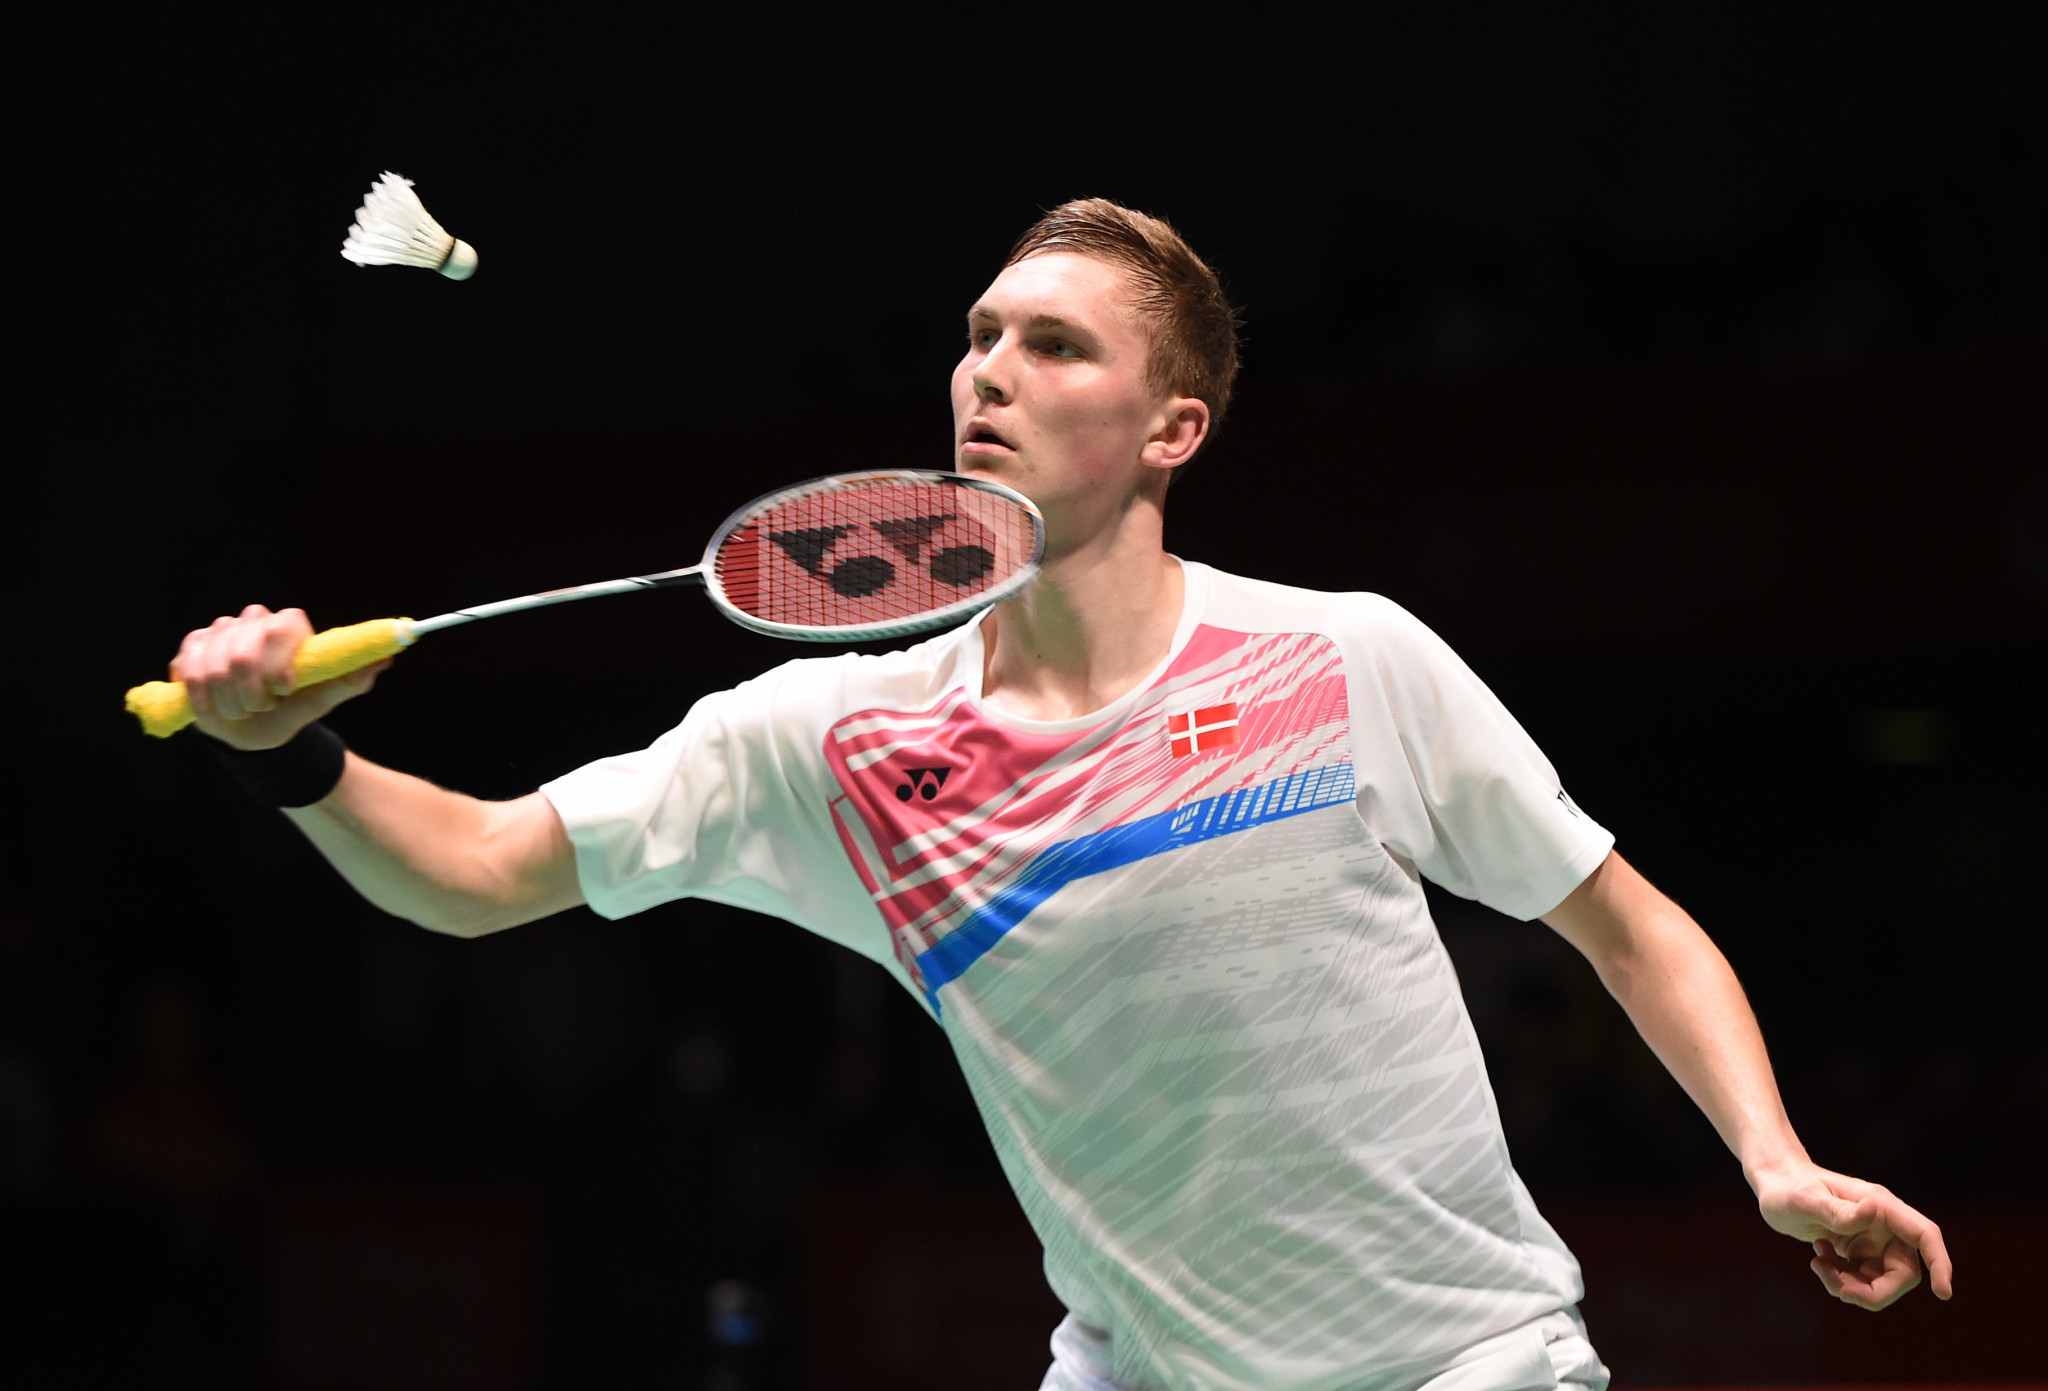 World champion among strong field on home soil at BWF Denmark Open